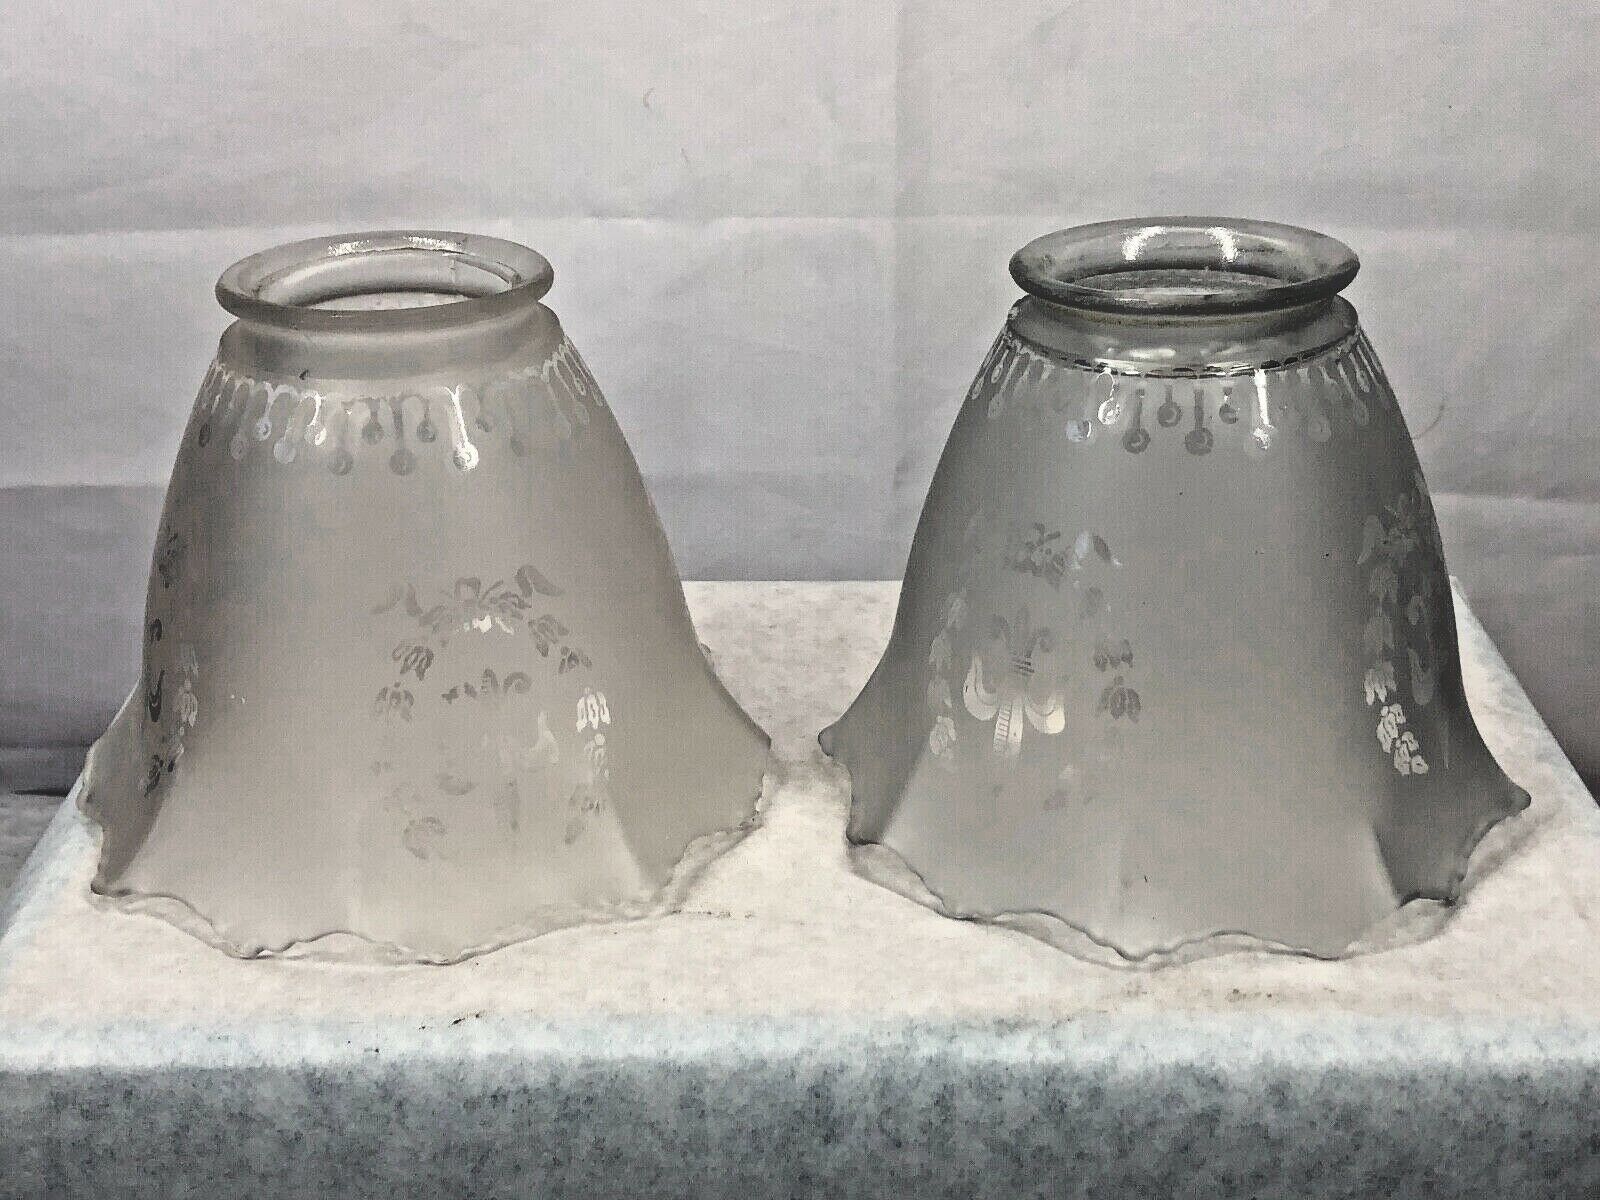 Antique Pair of Light Sconce Shades Matching See pics for Size and Condition